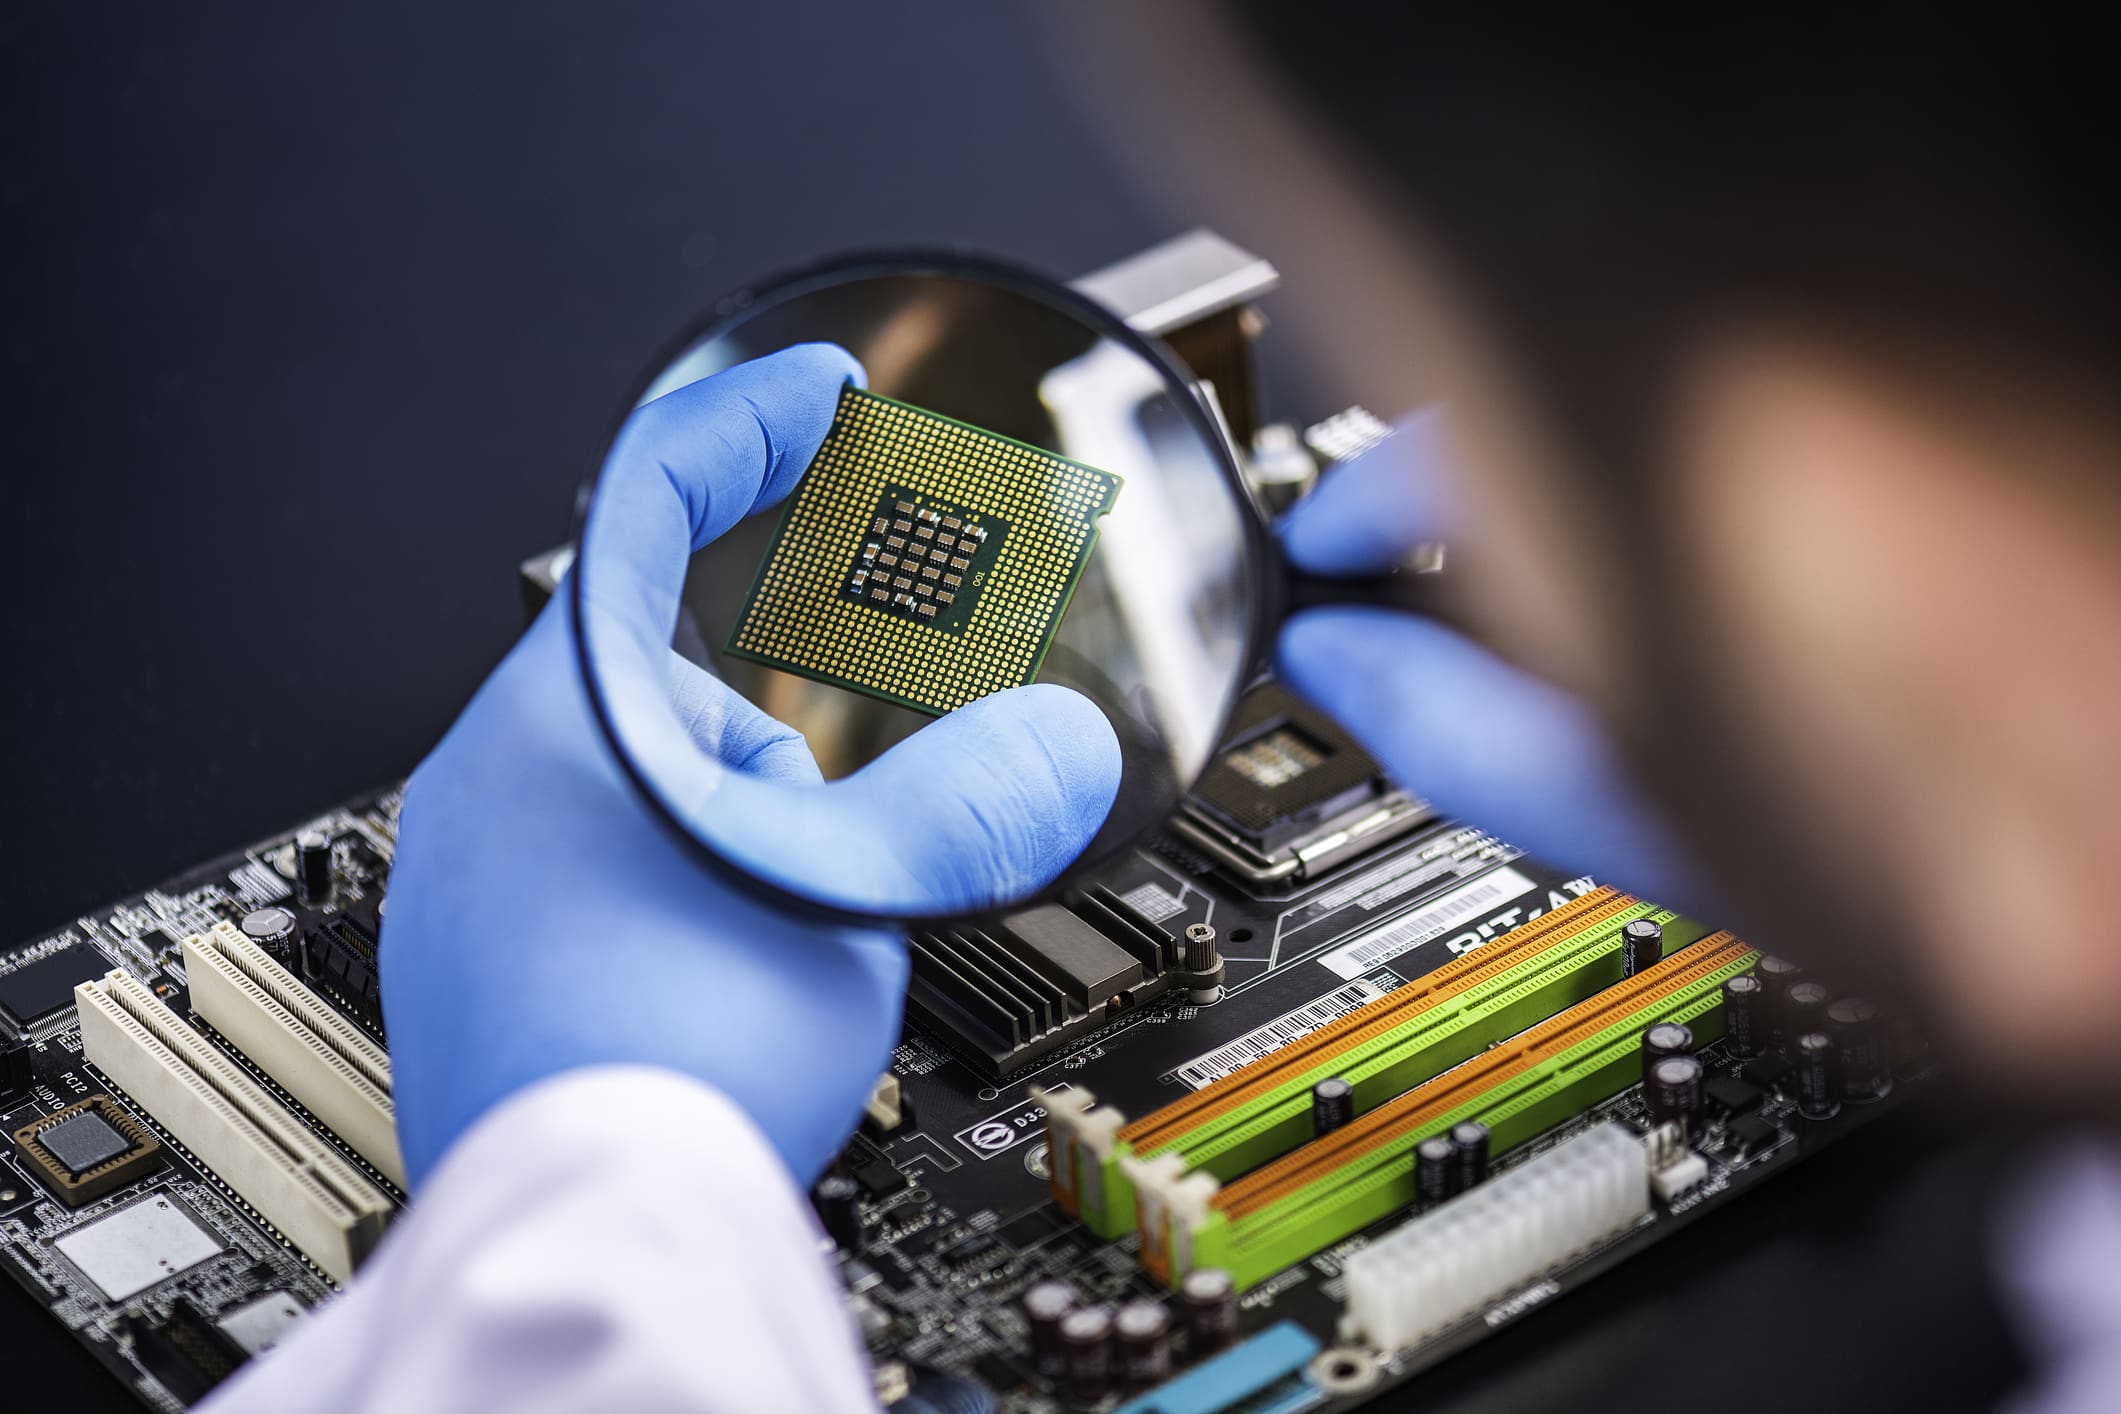 China pushes to design its own chips, but still relies on foreign tech